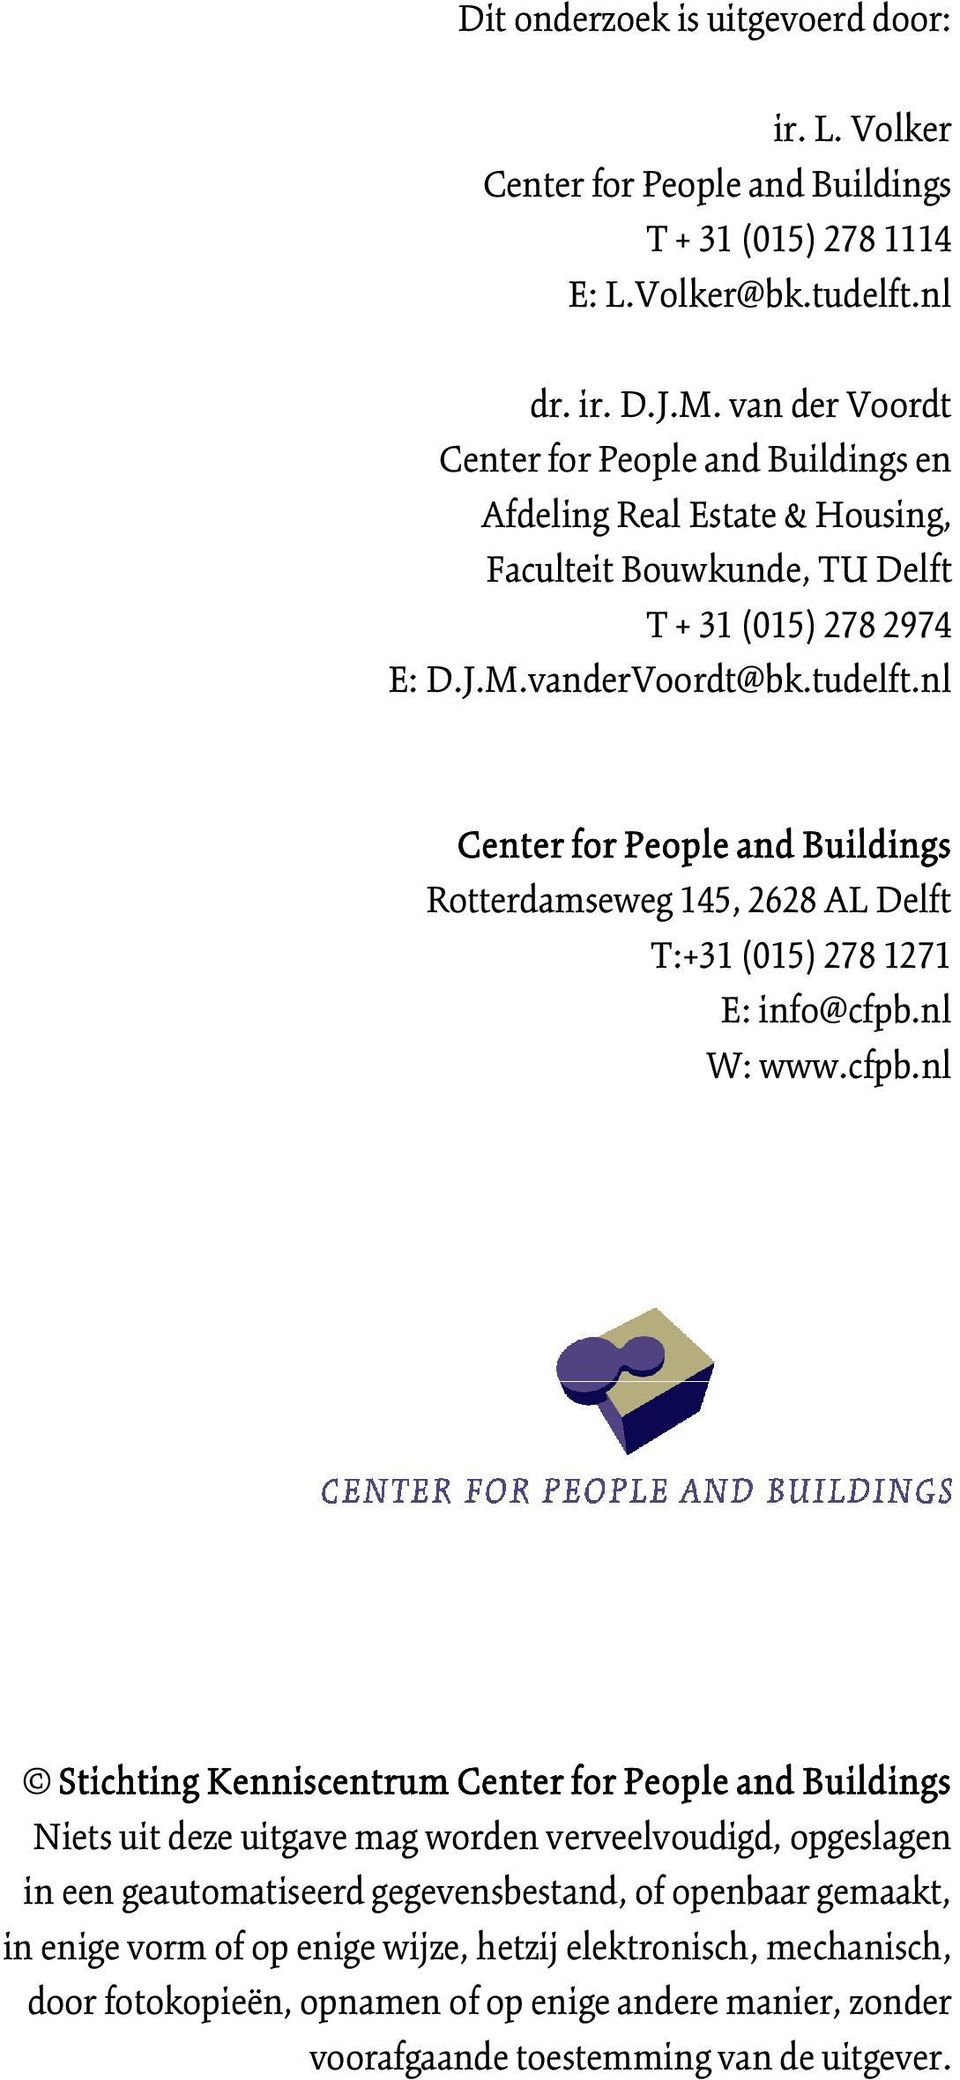 nl Center for People and Buildings Rotterdamseweg 145, 2628 AL Delft T:+31 (015) 278 1271 E: info@cfpb.